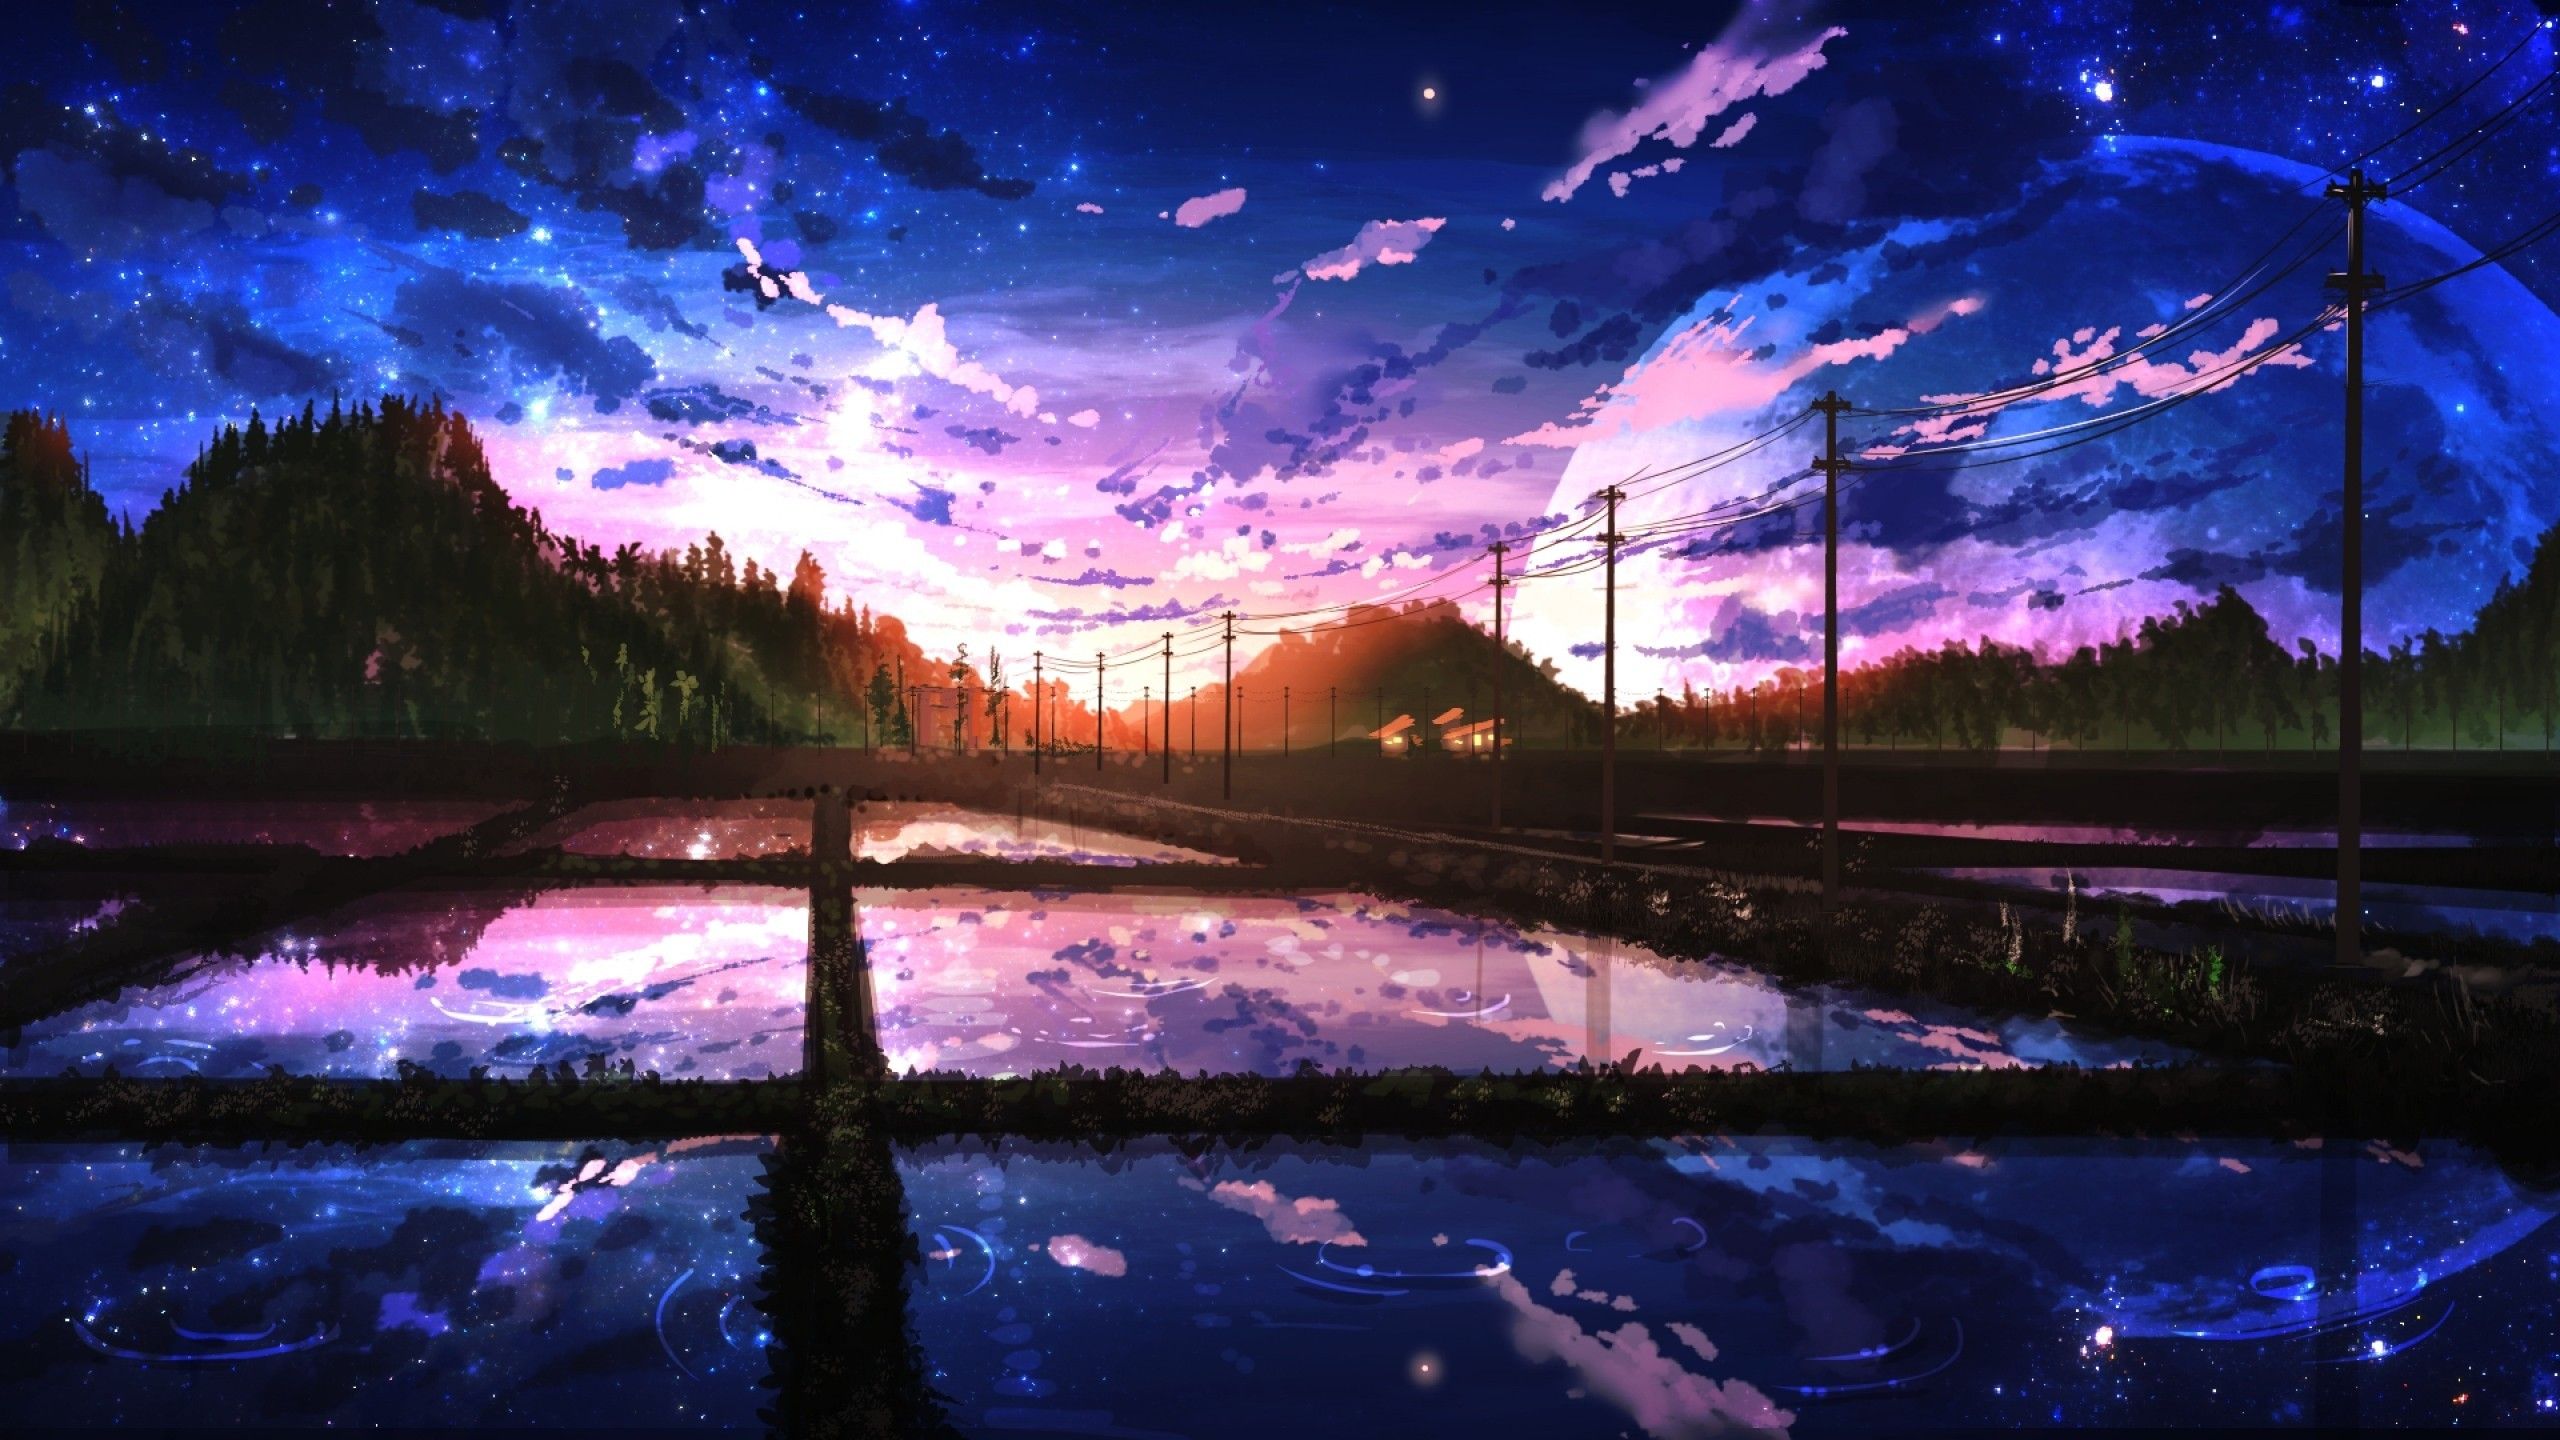 Download 2560x1440 Anime Landscape, Scenic, Moon, Painting, Sky